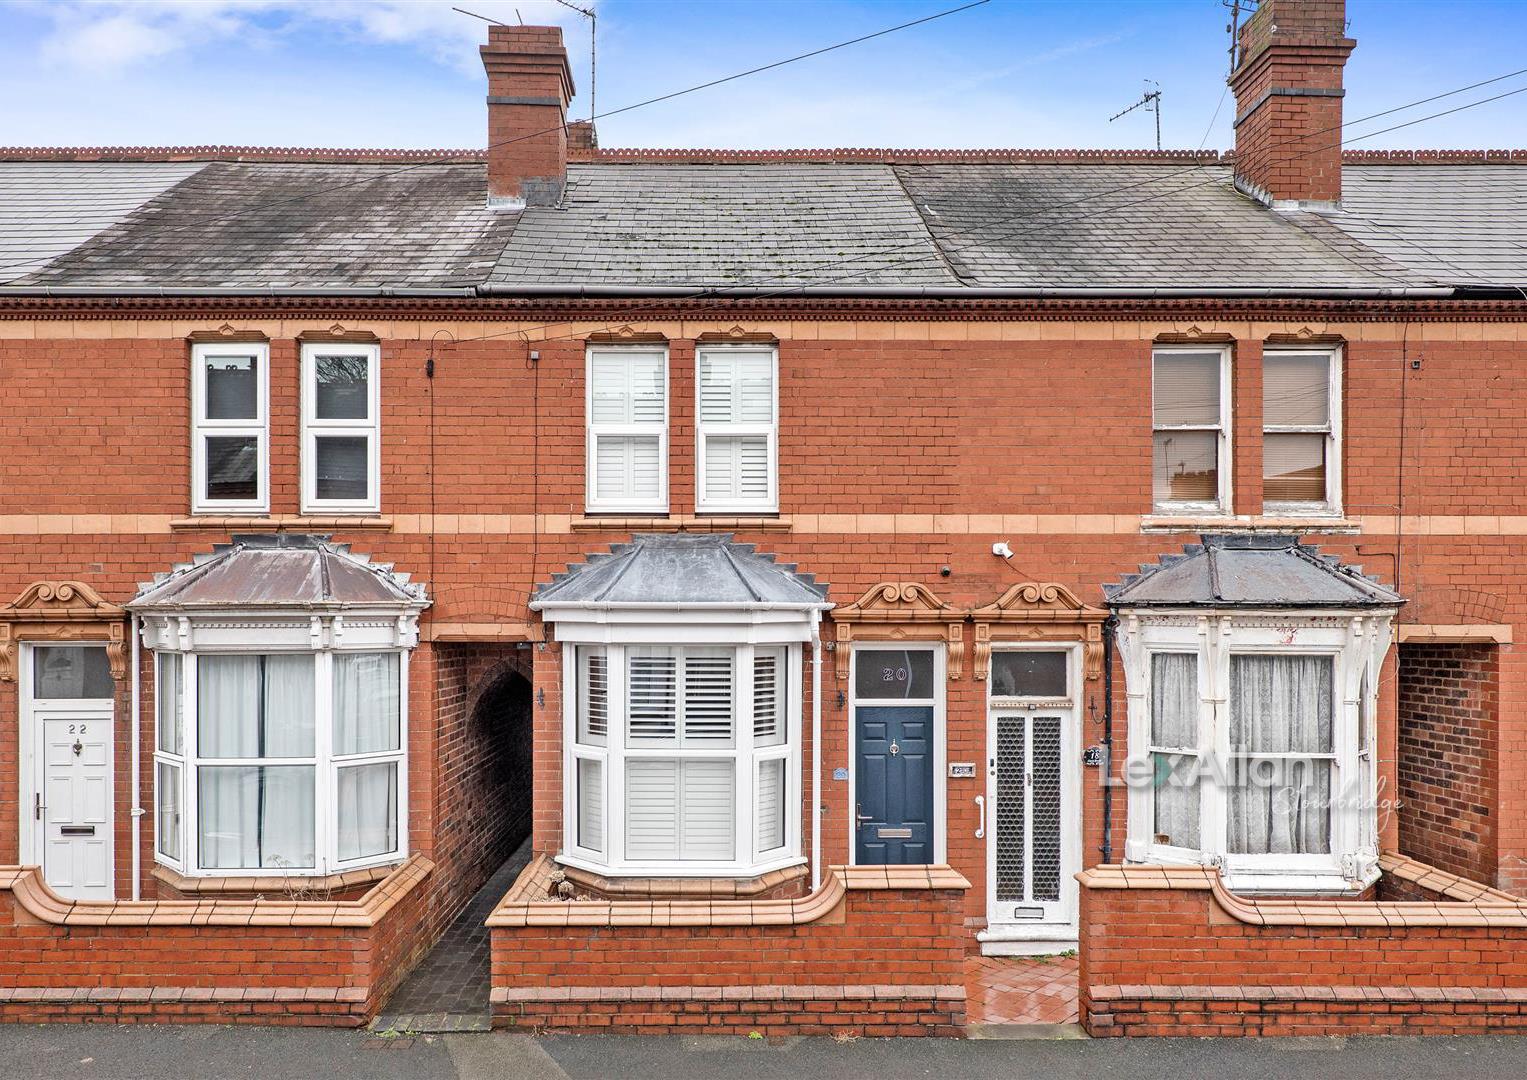 3 bed terraced house for sale in Clark Street, Stourbridge - Property Image 1